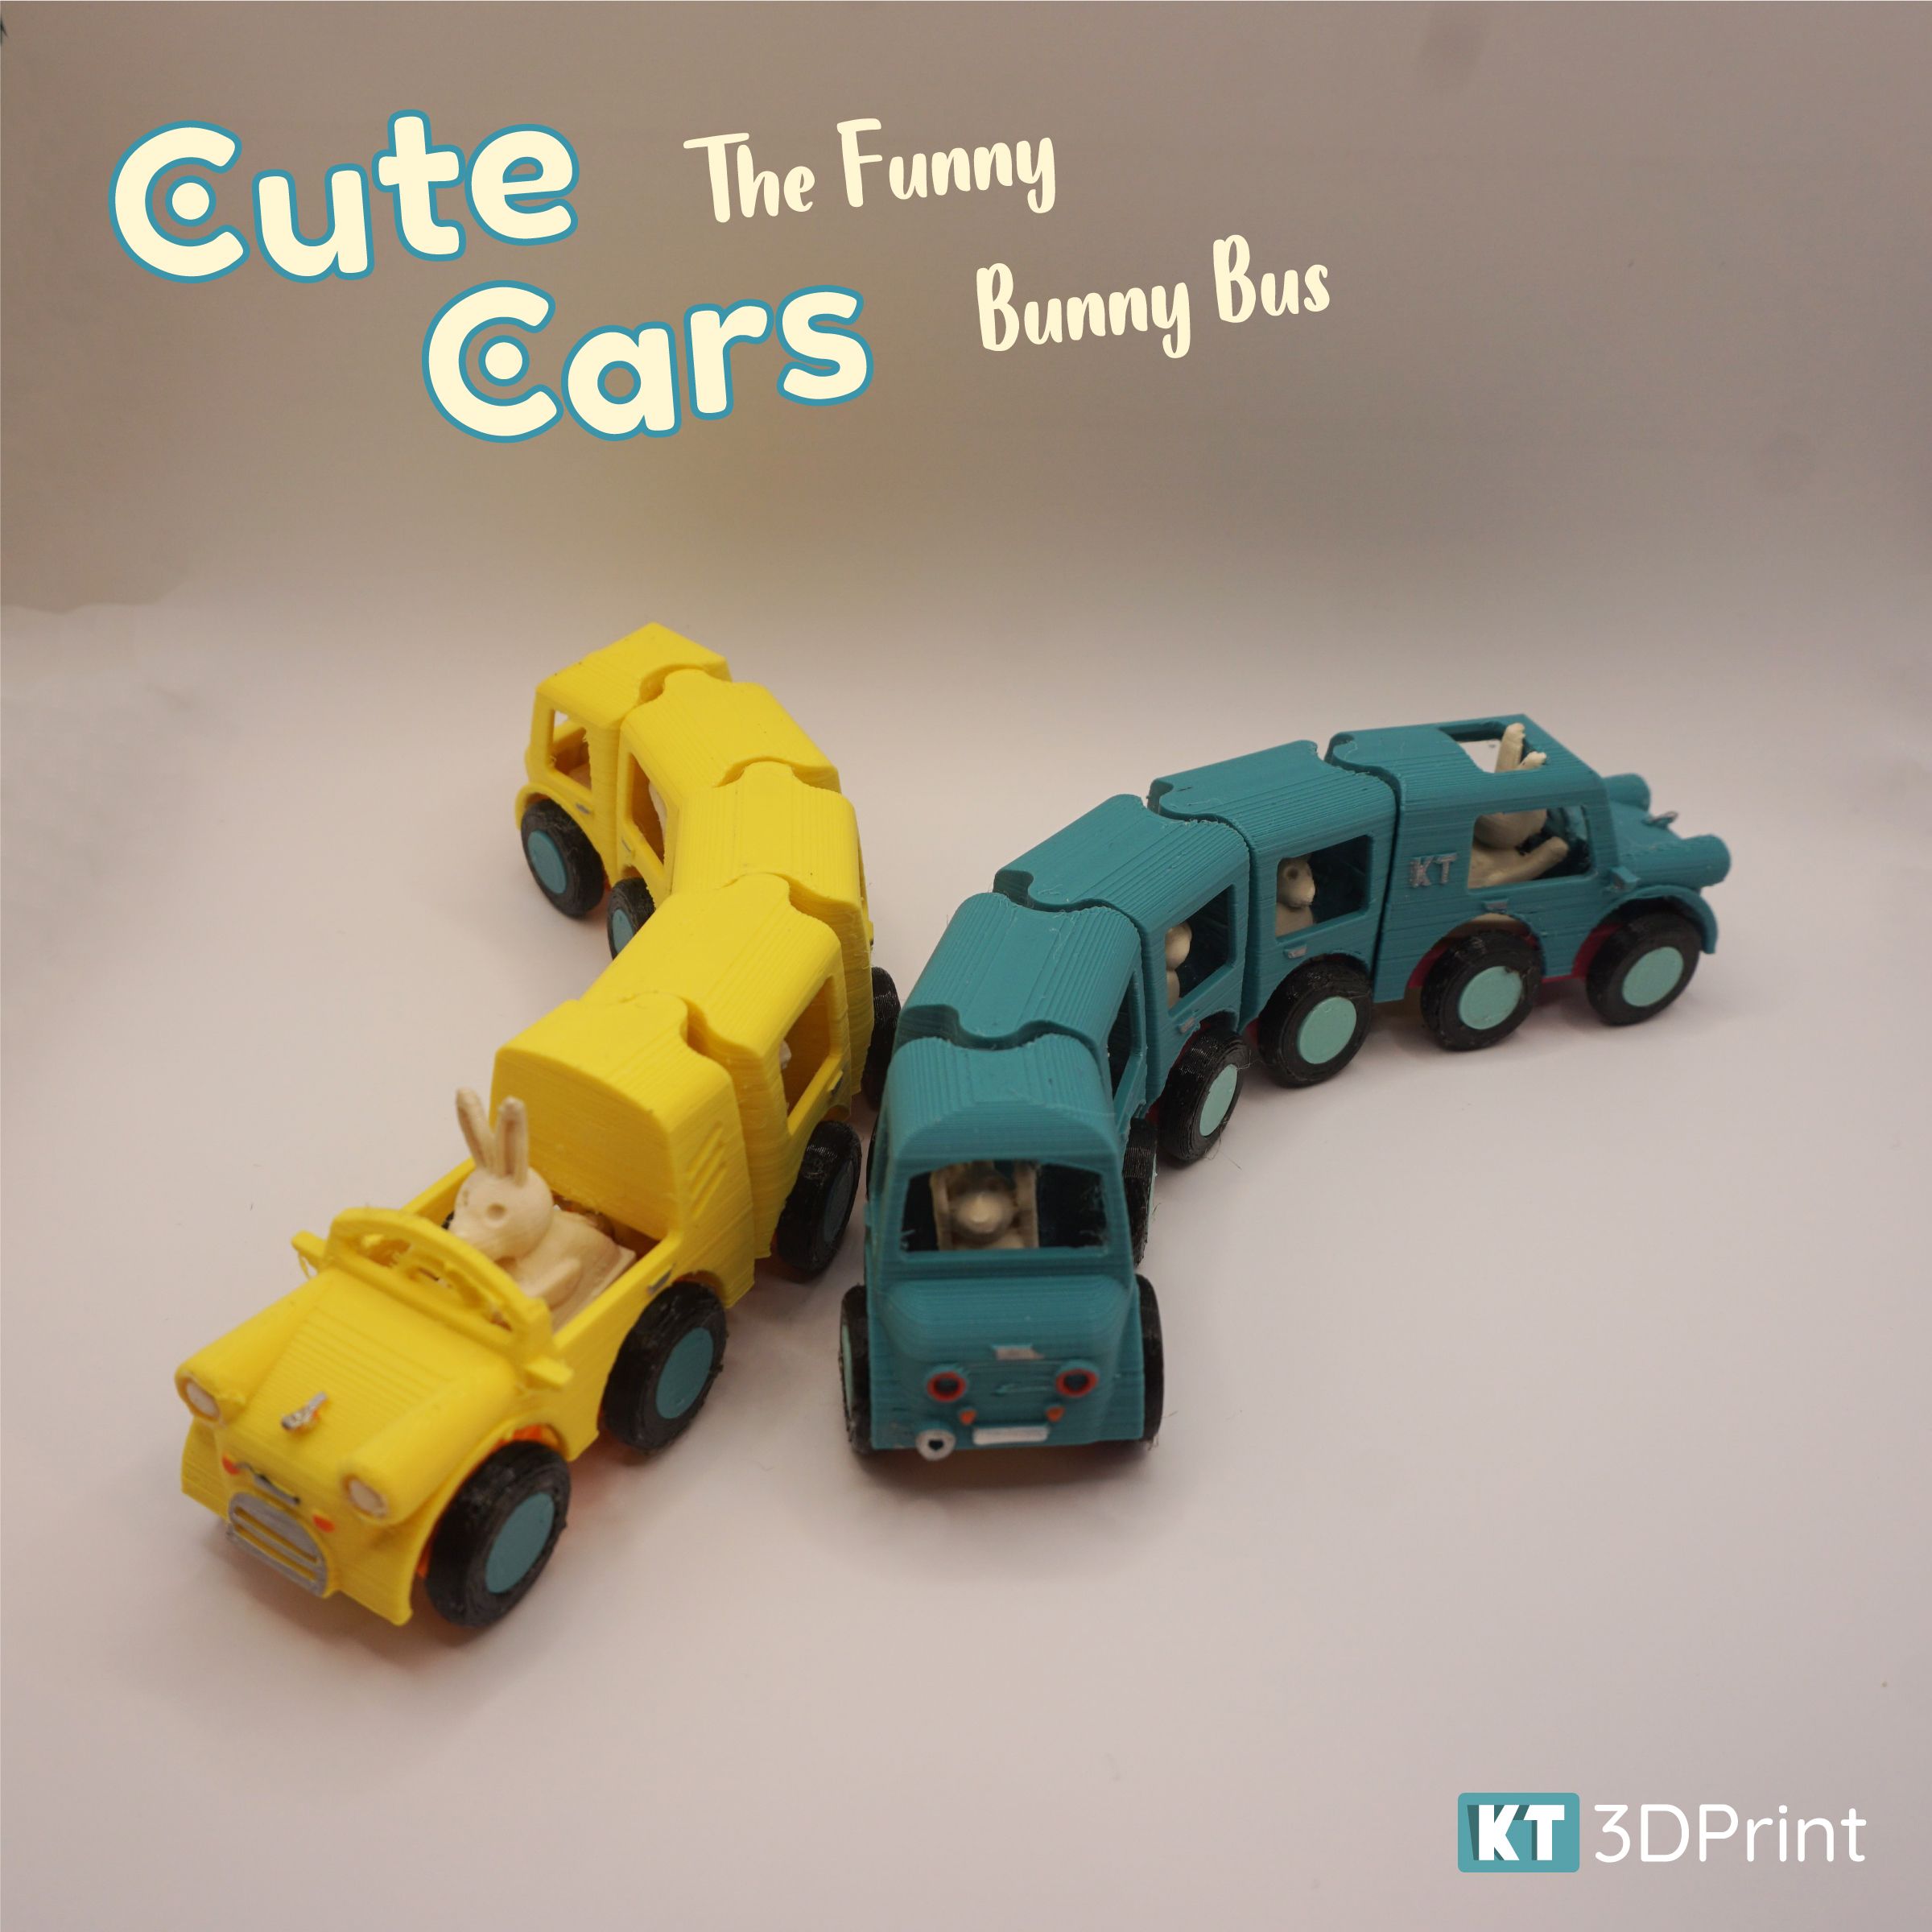 CuteCarsBunny_9.jpg Download STL file Cute Cars - Funny Bunny Bus • 3D printing object, KT3Dprint